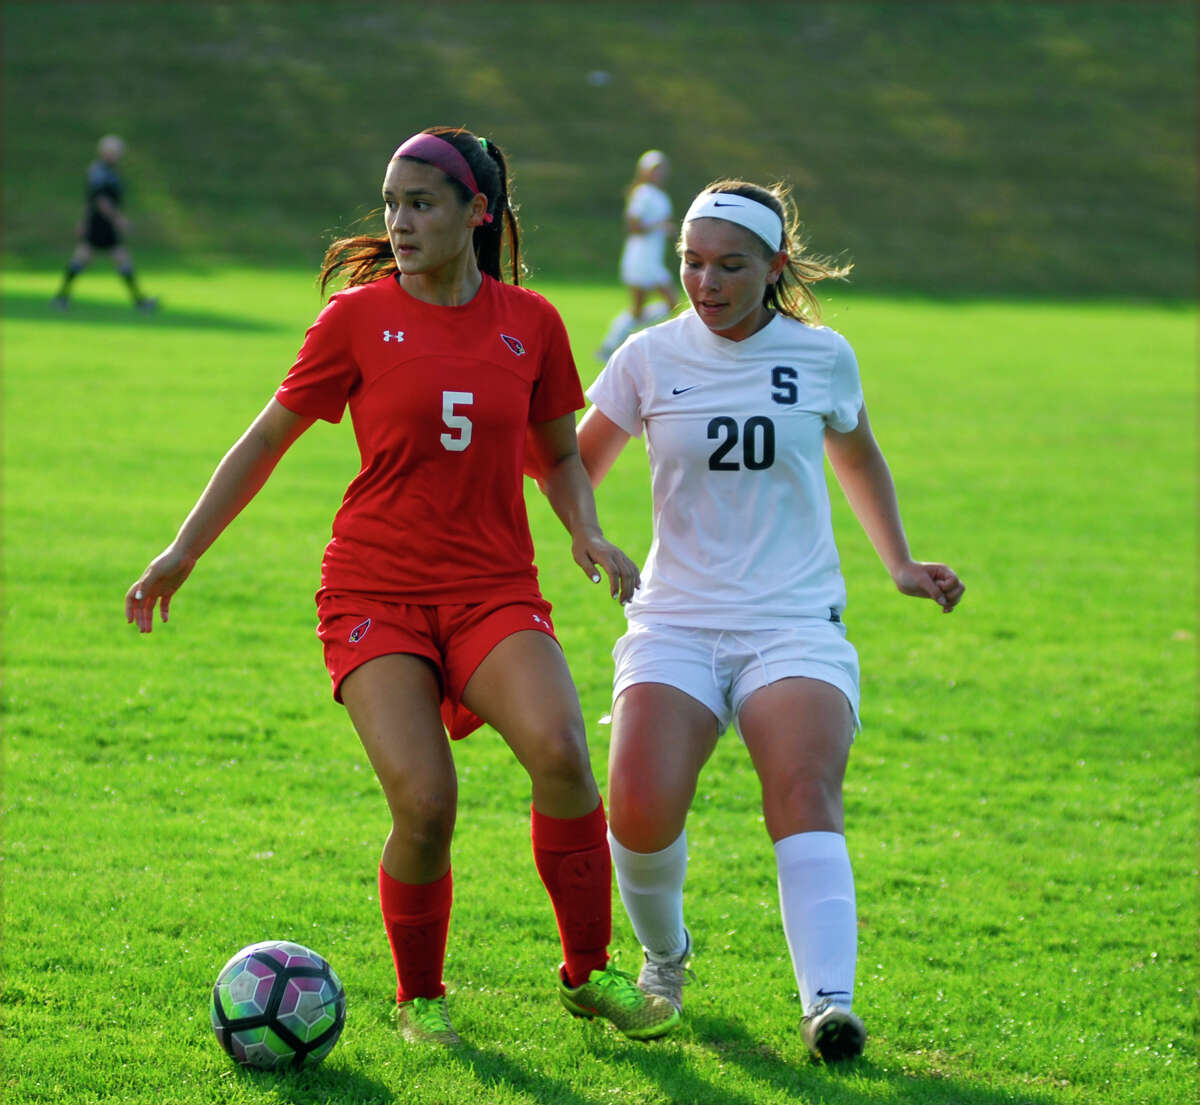 Greenwich's Kimberly Kockenmeister, left, and Staples' Annie Amacker battled for possession during a girls soccer game on Tuesday, September 27th, 2016.